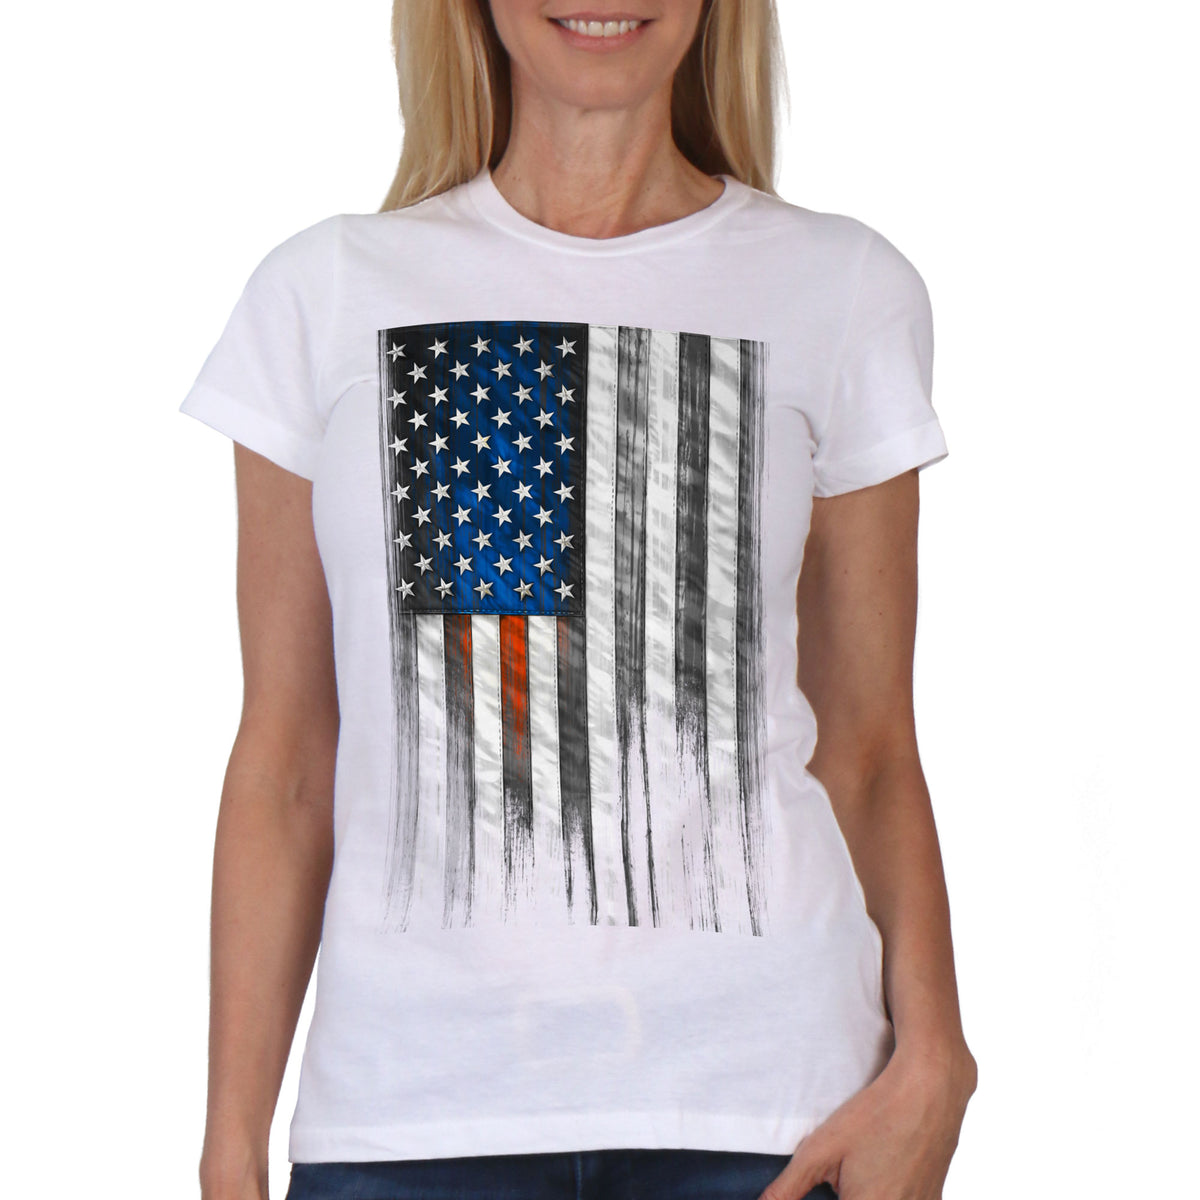 Hot Leathers GLR1569 Ladies White Short Sleeve Heartbeat Flag T Shirt